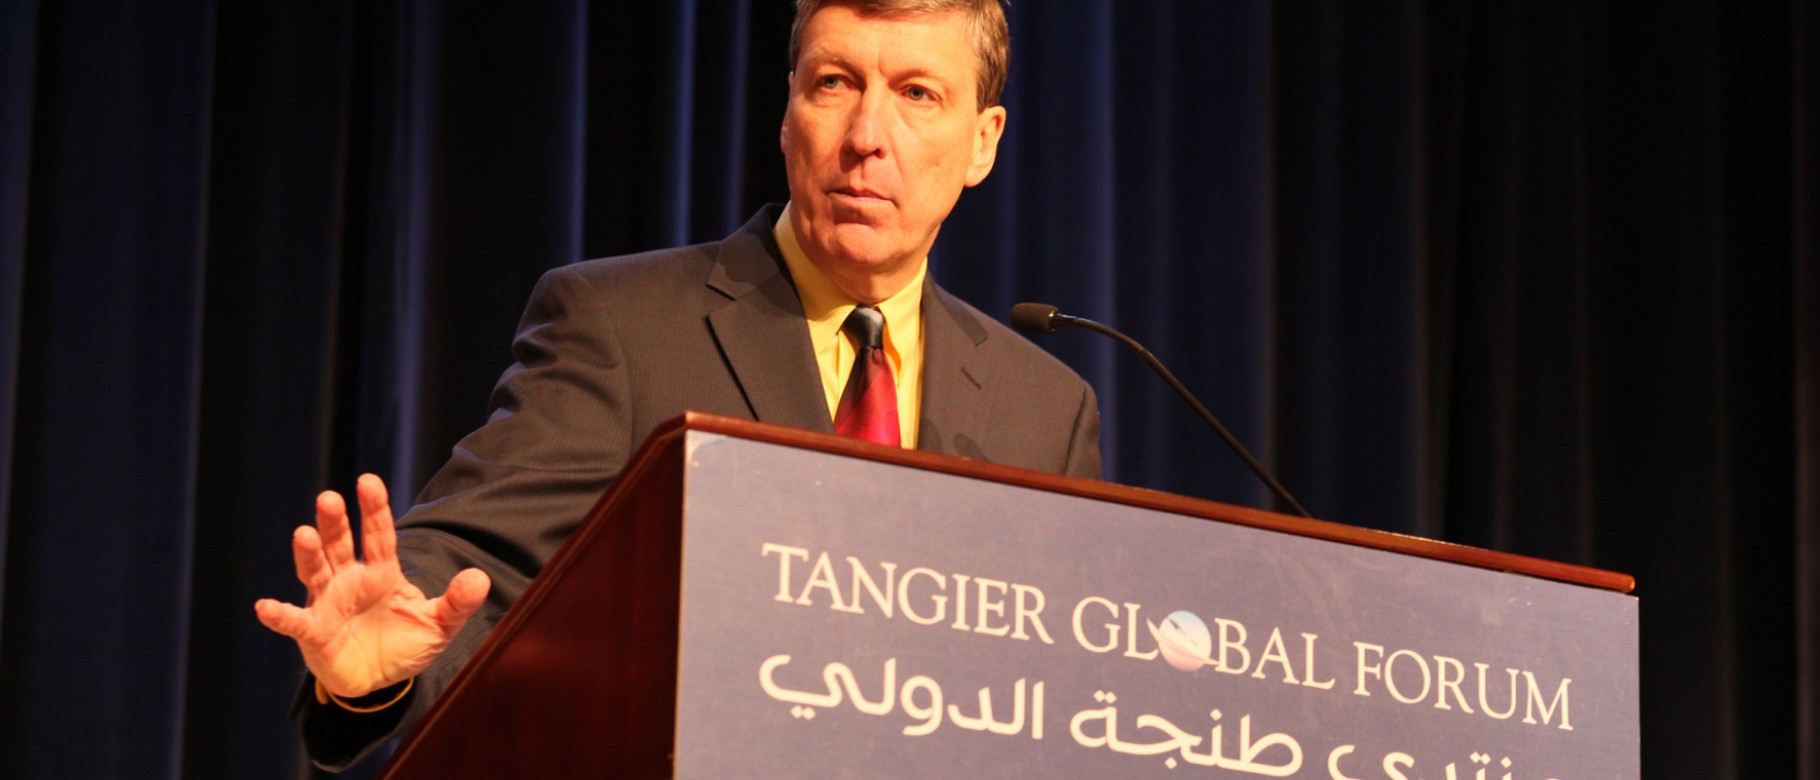 Mark Smith lectures at the UNE Tangier Global Forum